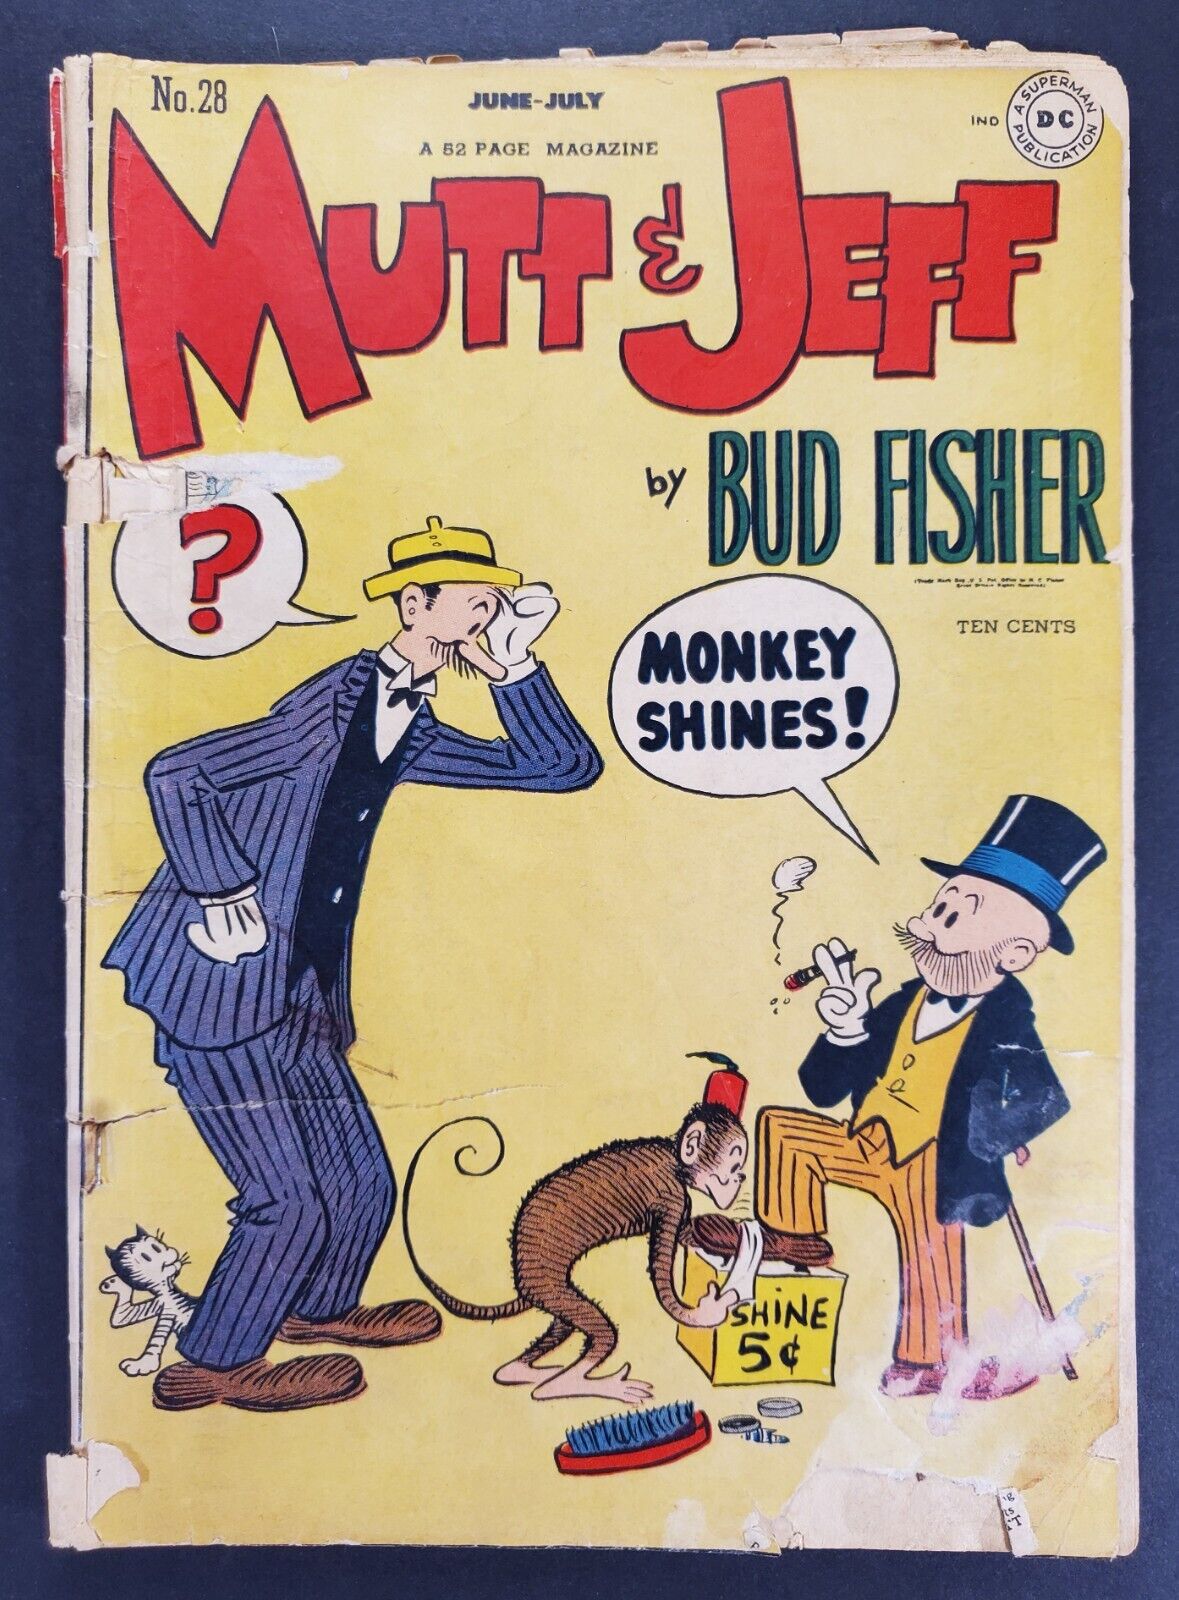 Mutt and Jeff #28 DC Comics Golden Age 1947